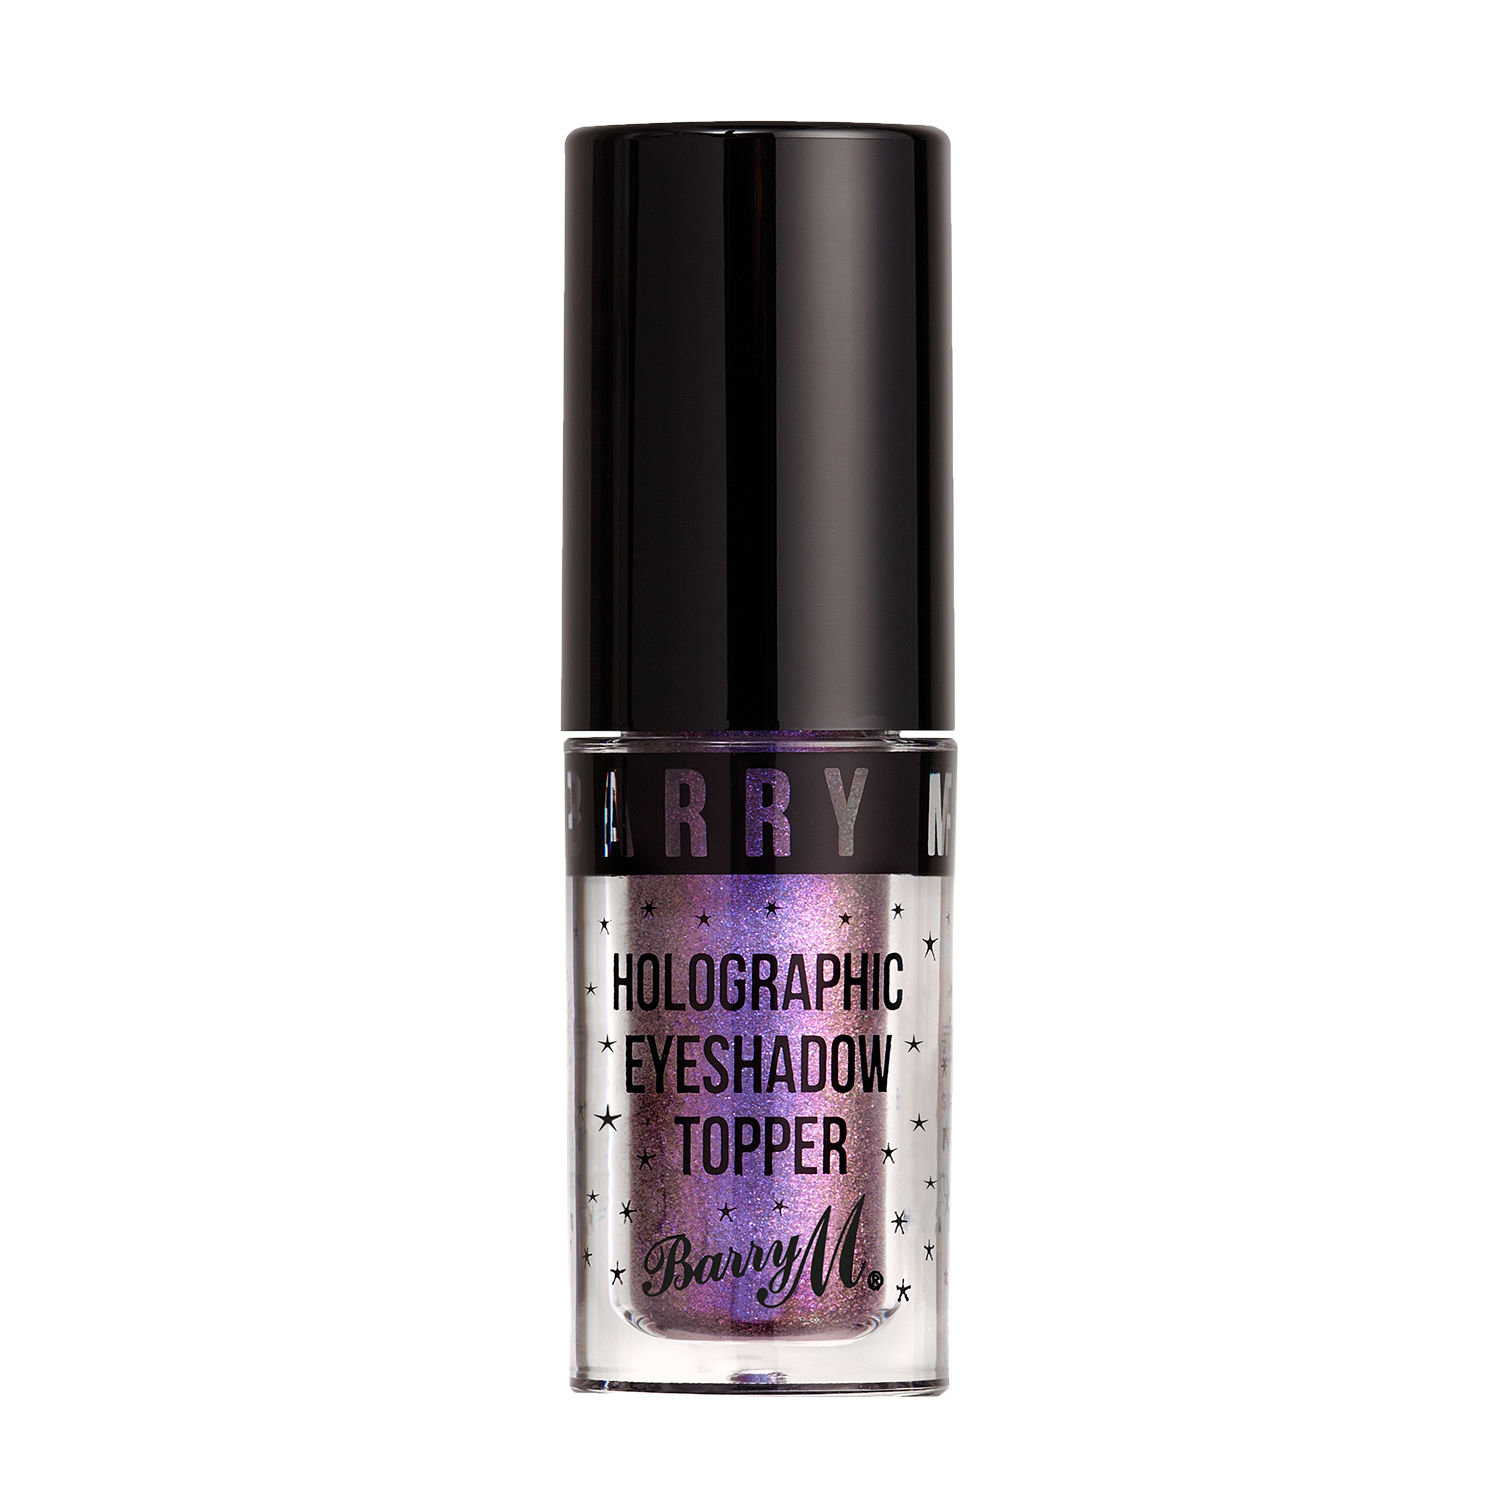 Barry M Holographic Eyeshadow Topper